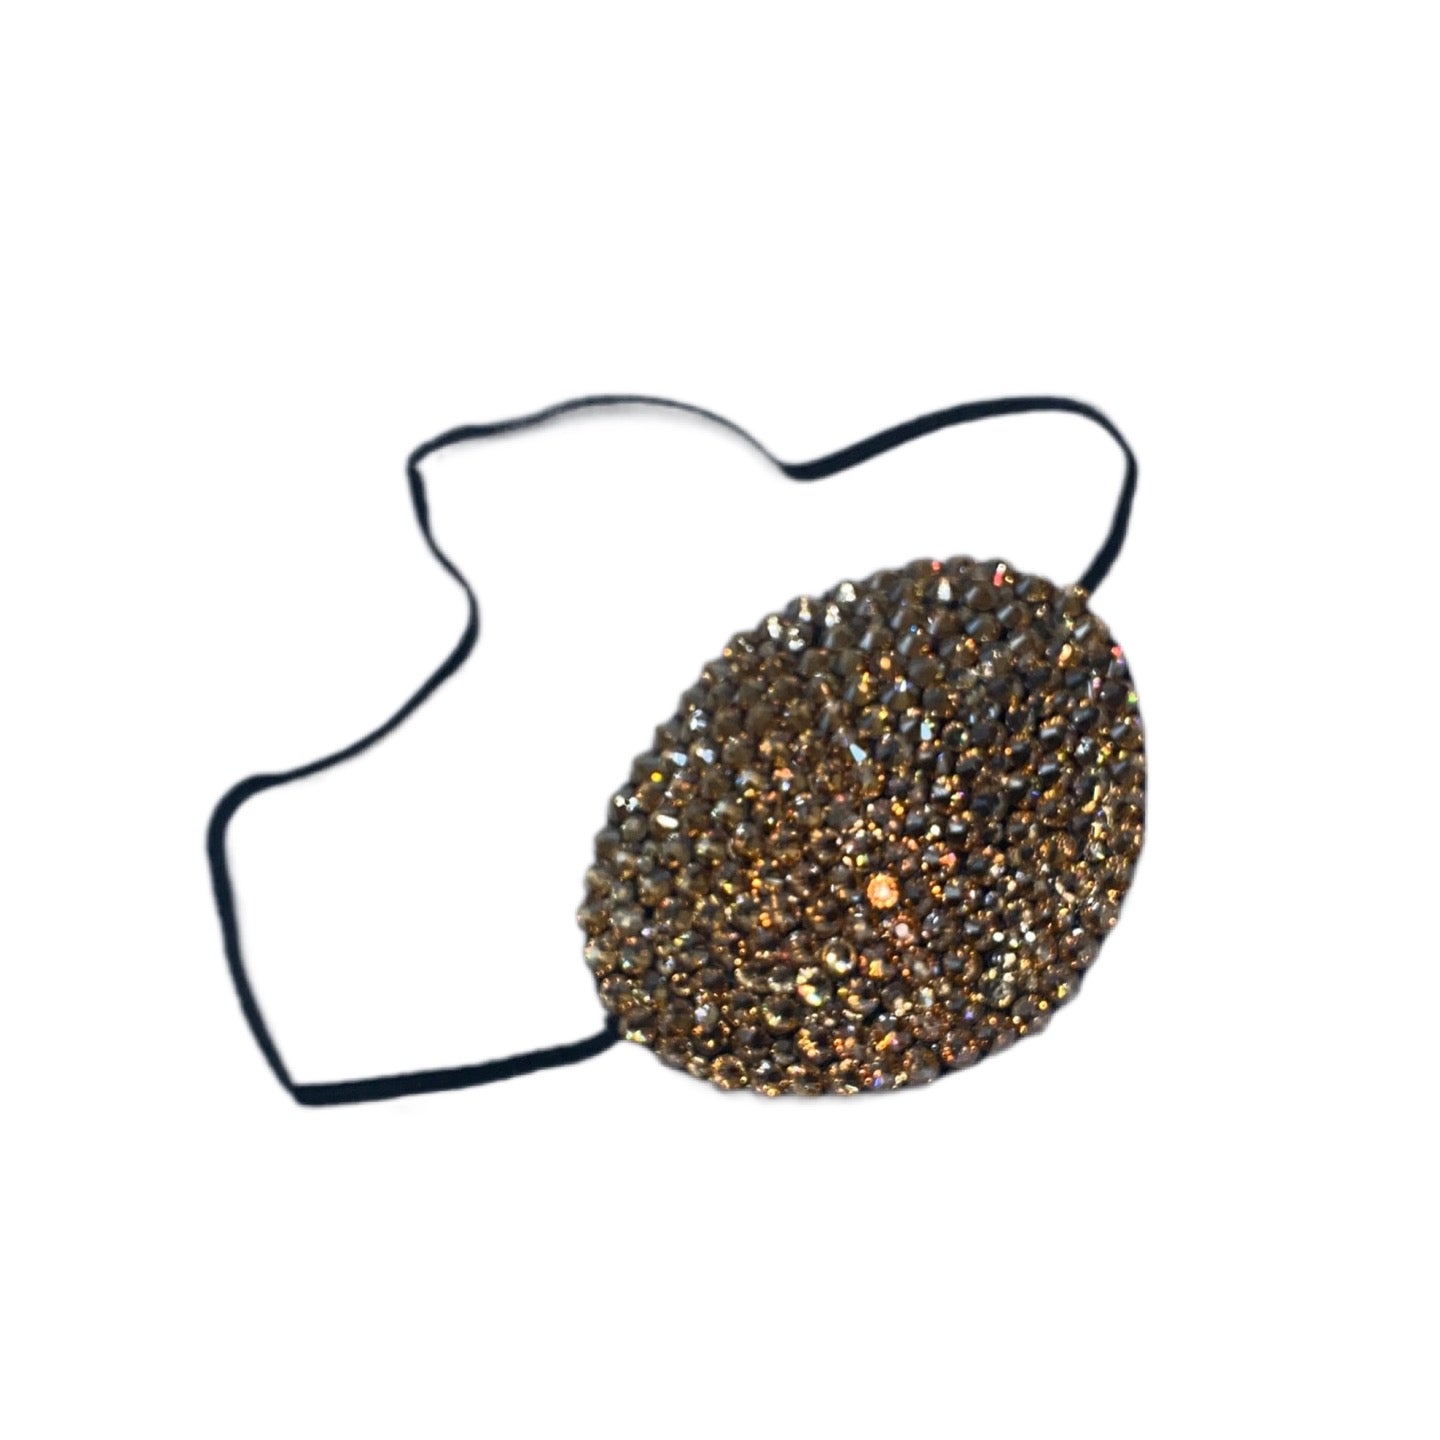 Black Eye Patch Bedazzled In Luxe Gold Crystals